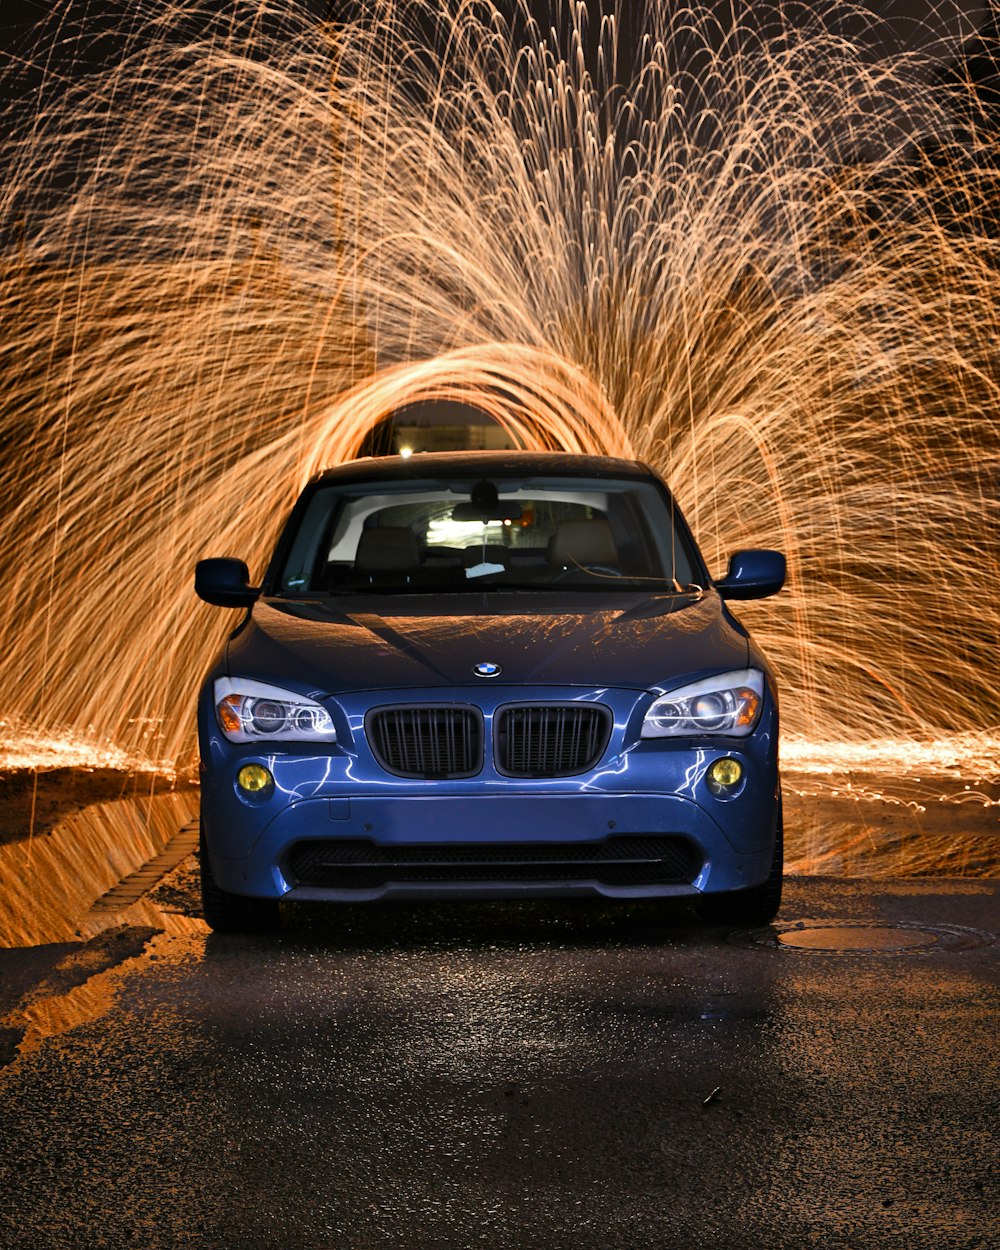 blue bmw car on brown dirt road during daytime